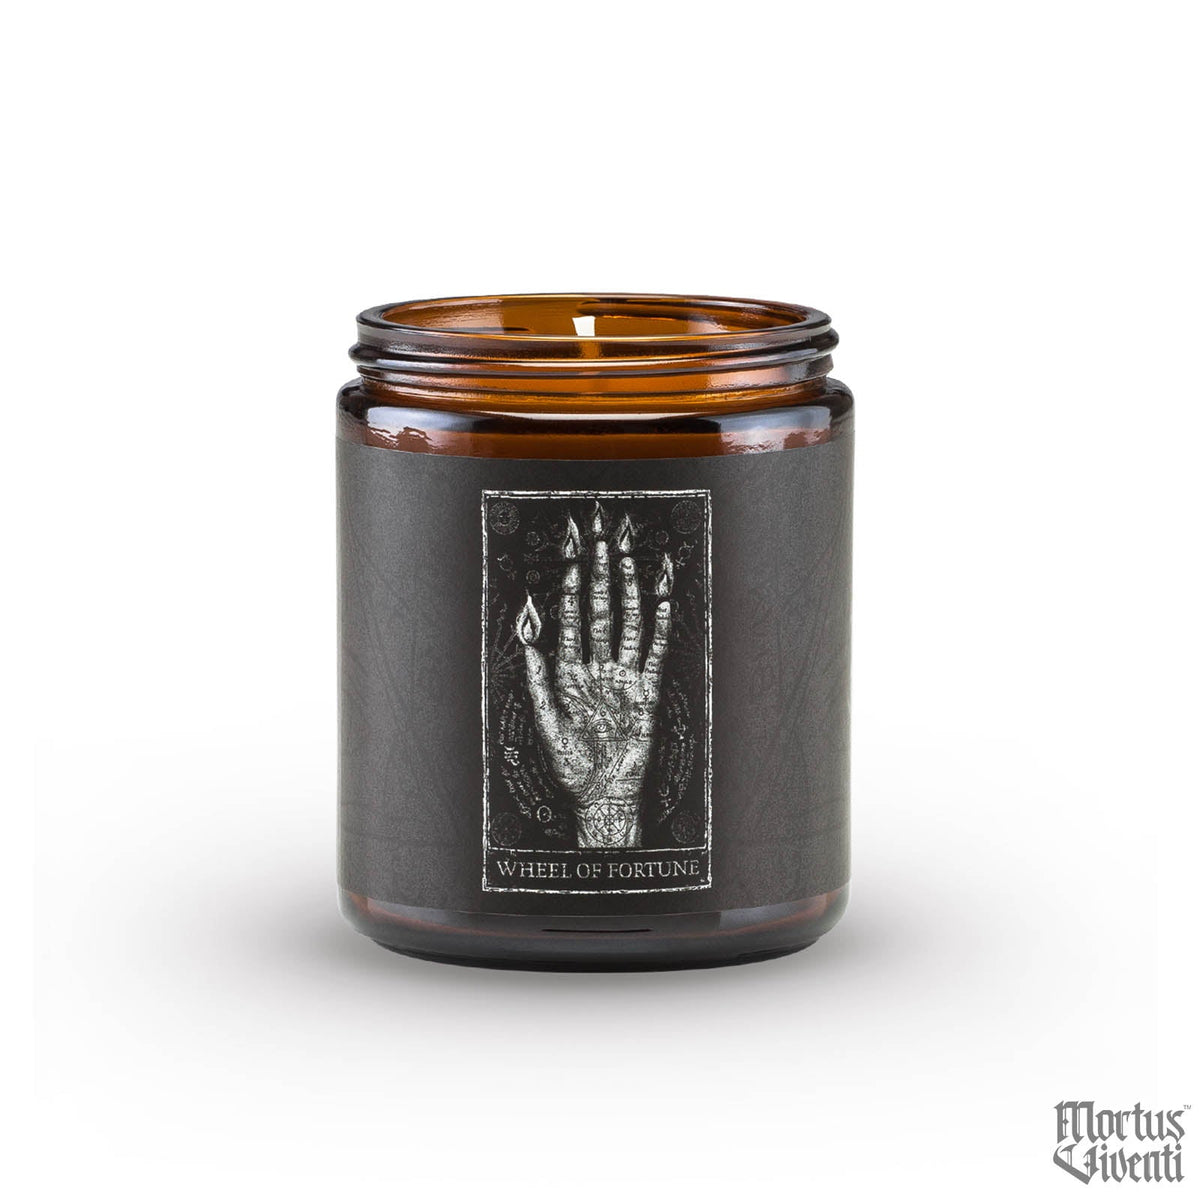 Wheel of Fortune Tarot Card Soy Candle